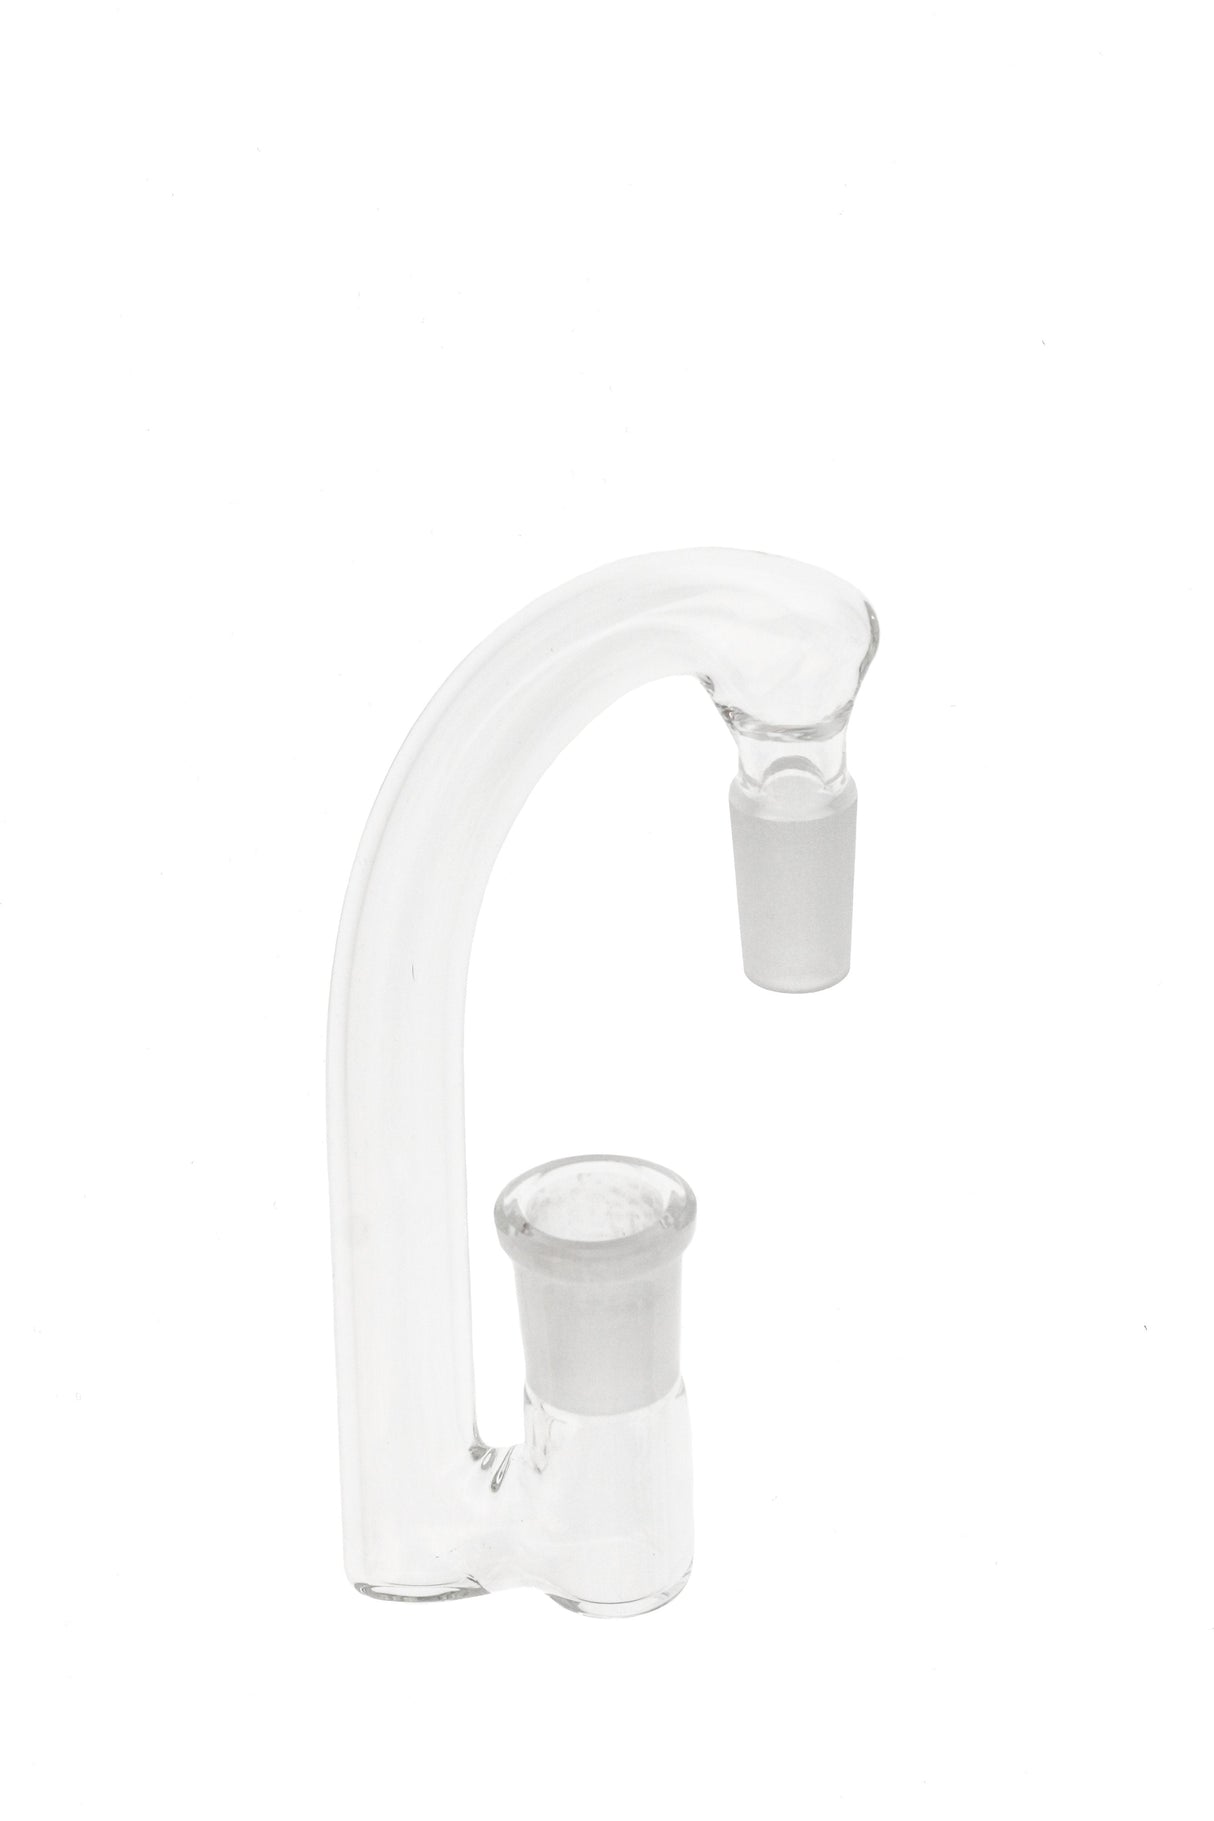 TAG Drop Down Adapter with 1" Drop, Male-Female Joint, Clear Glass, Side View